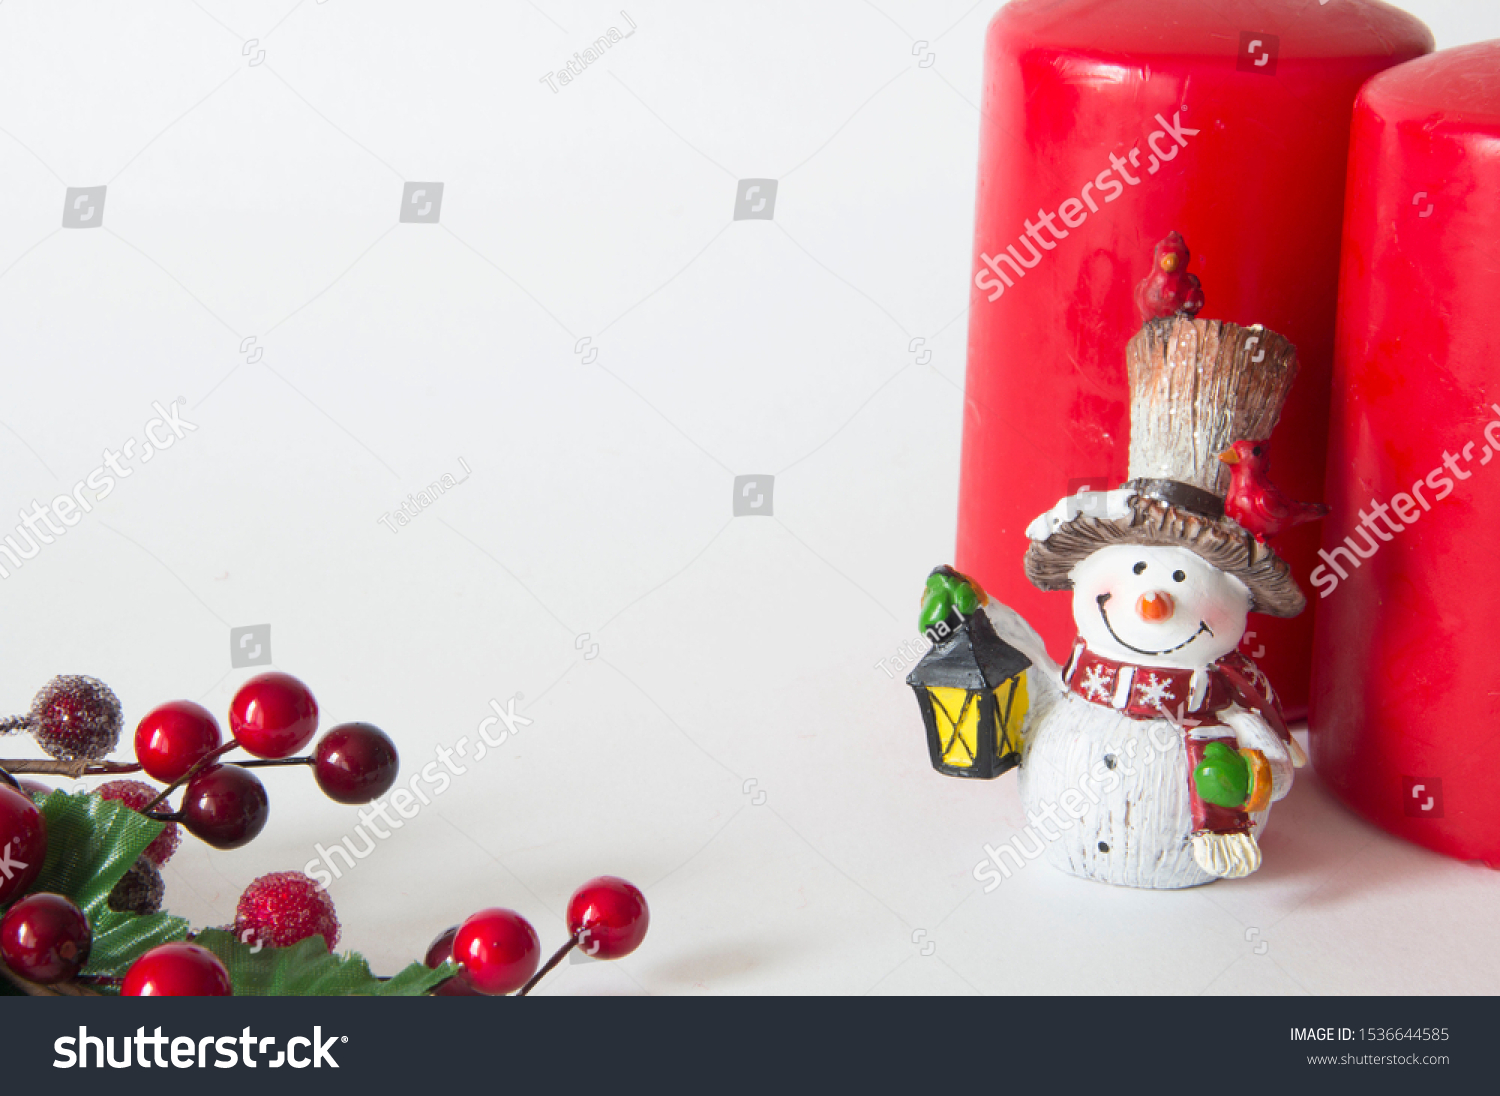 Christmas card with Christmas figures and branch with red berries #1536644585